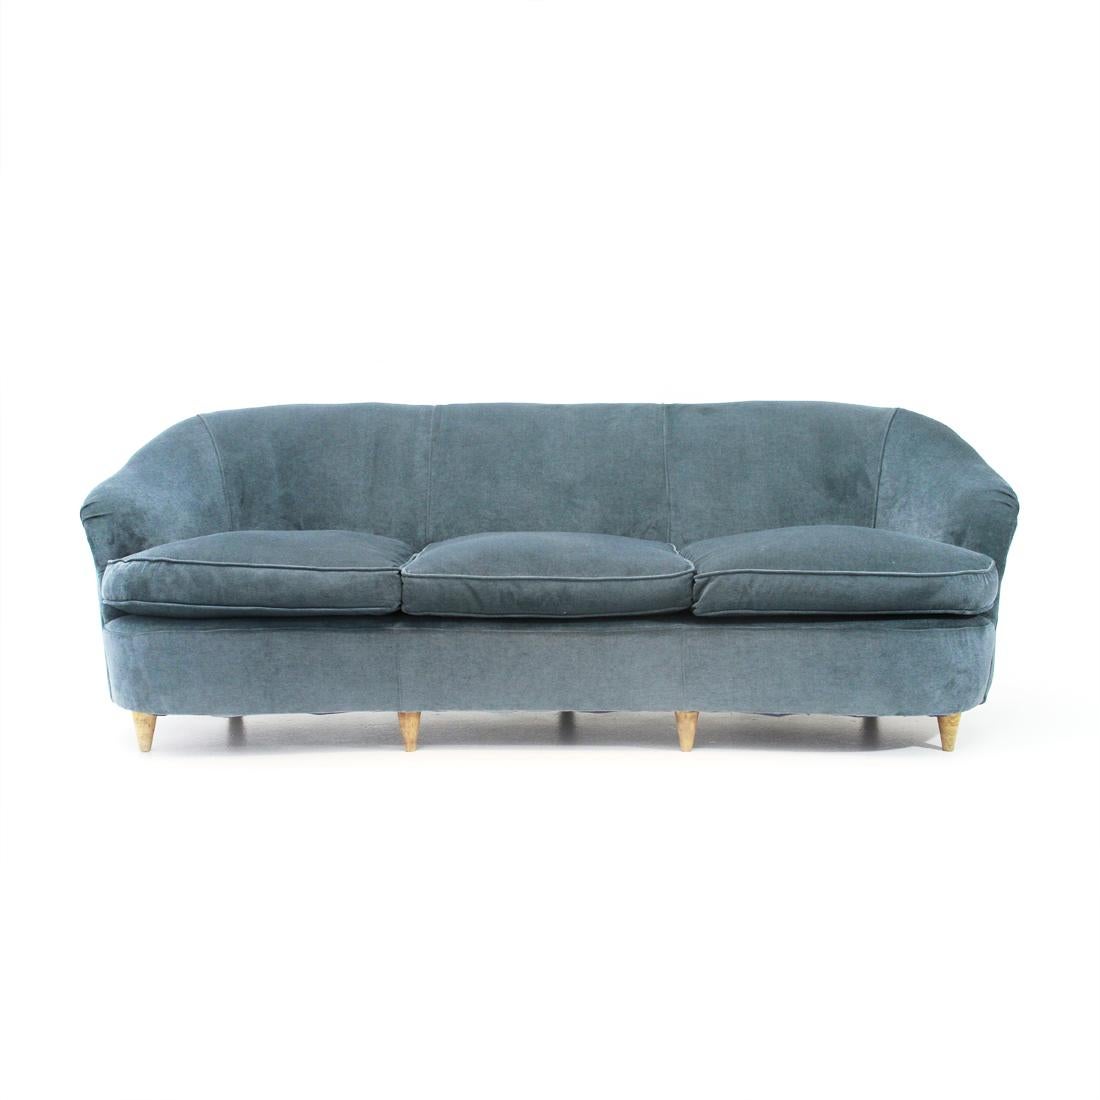 Italian sofa produced in the 1940s.
Wooden structure padded and lined with velvet fabric.
Sitting with upholstered cushions.
Feet in wooden conical shape.
Good general condition of the structure, same stains and small holes on the fabric visible